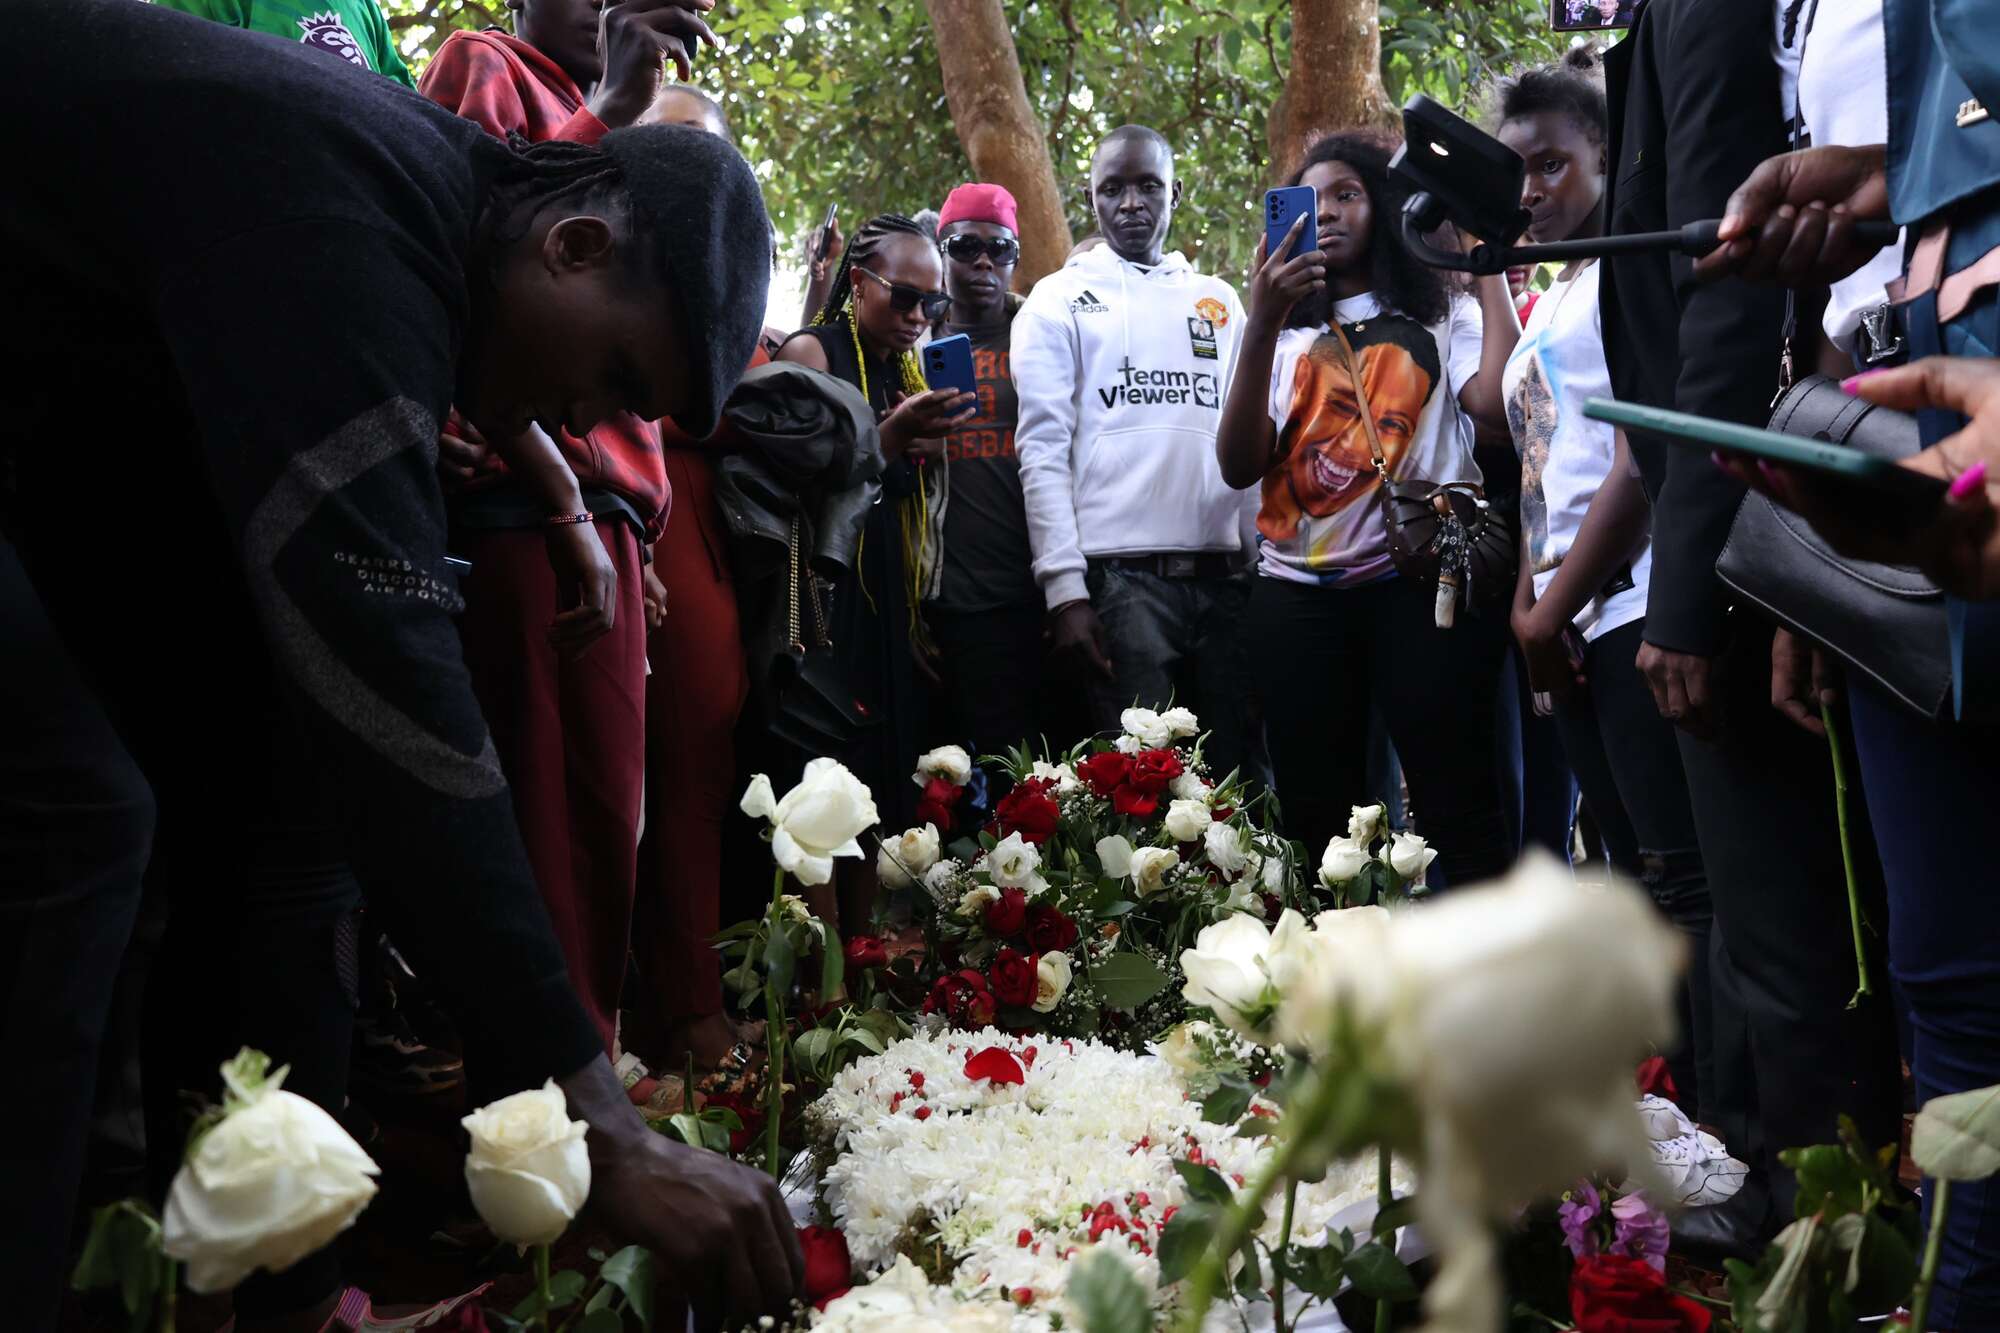 When Brian Chira was buried, the peaceful community was disturbed by inebriated Tiktokers